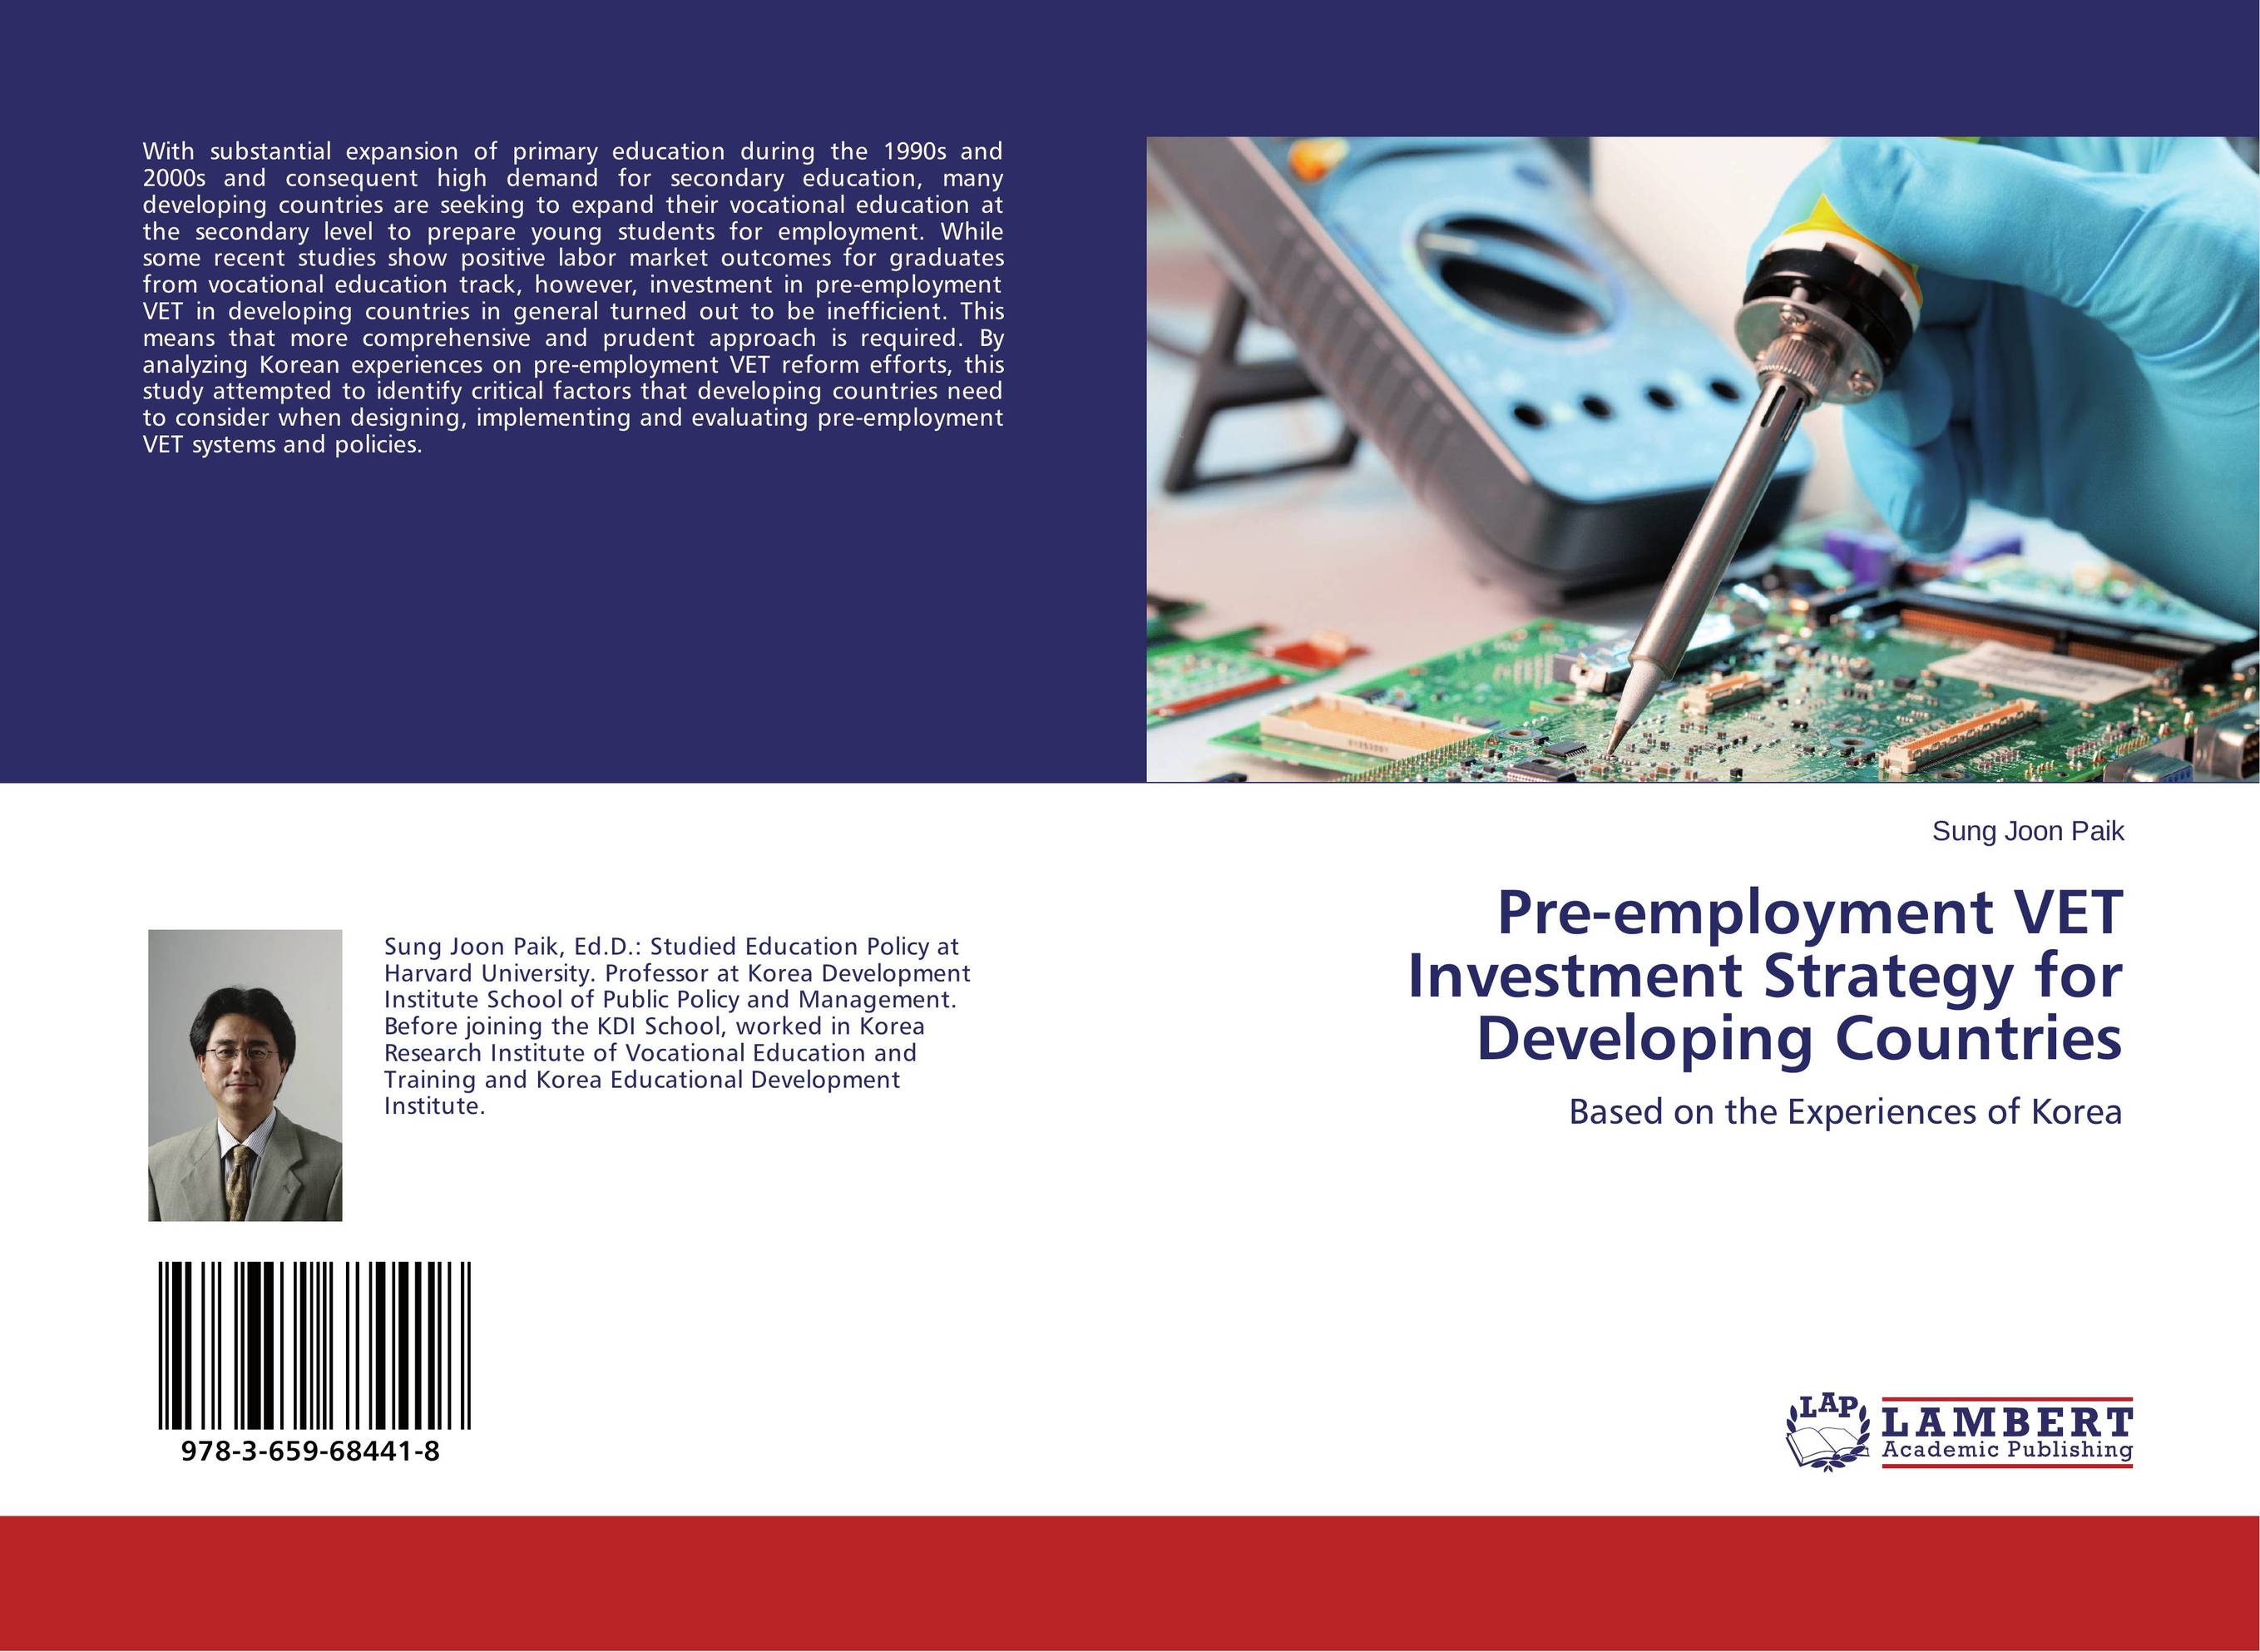 Pre-employment VET Investment Strategy for Developing Countries